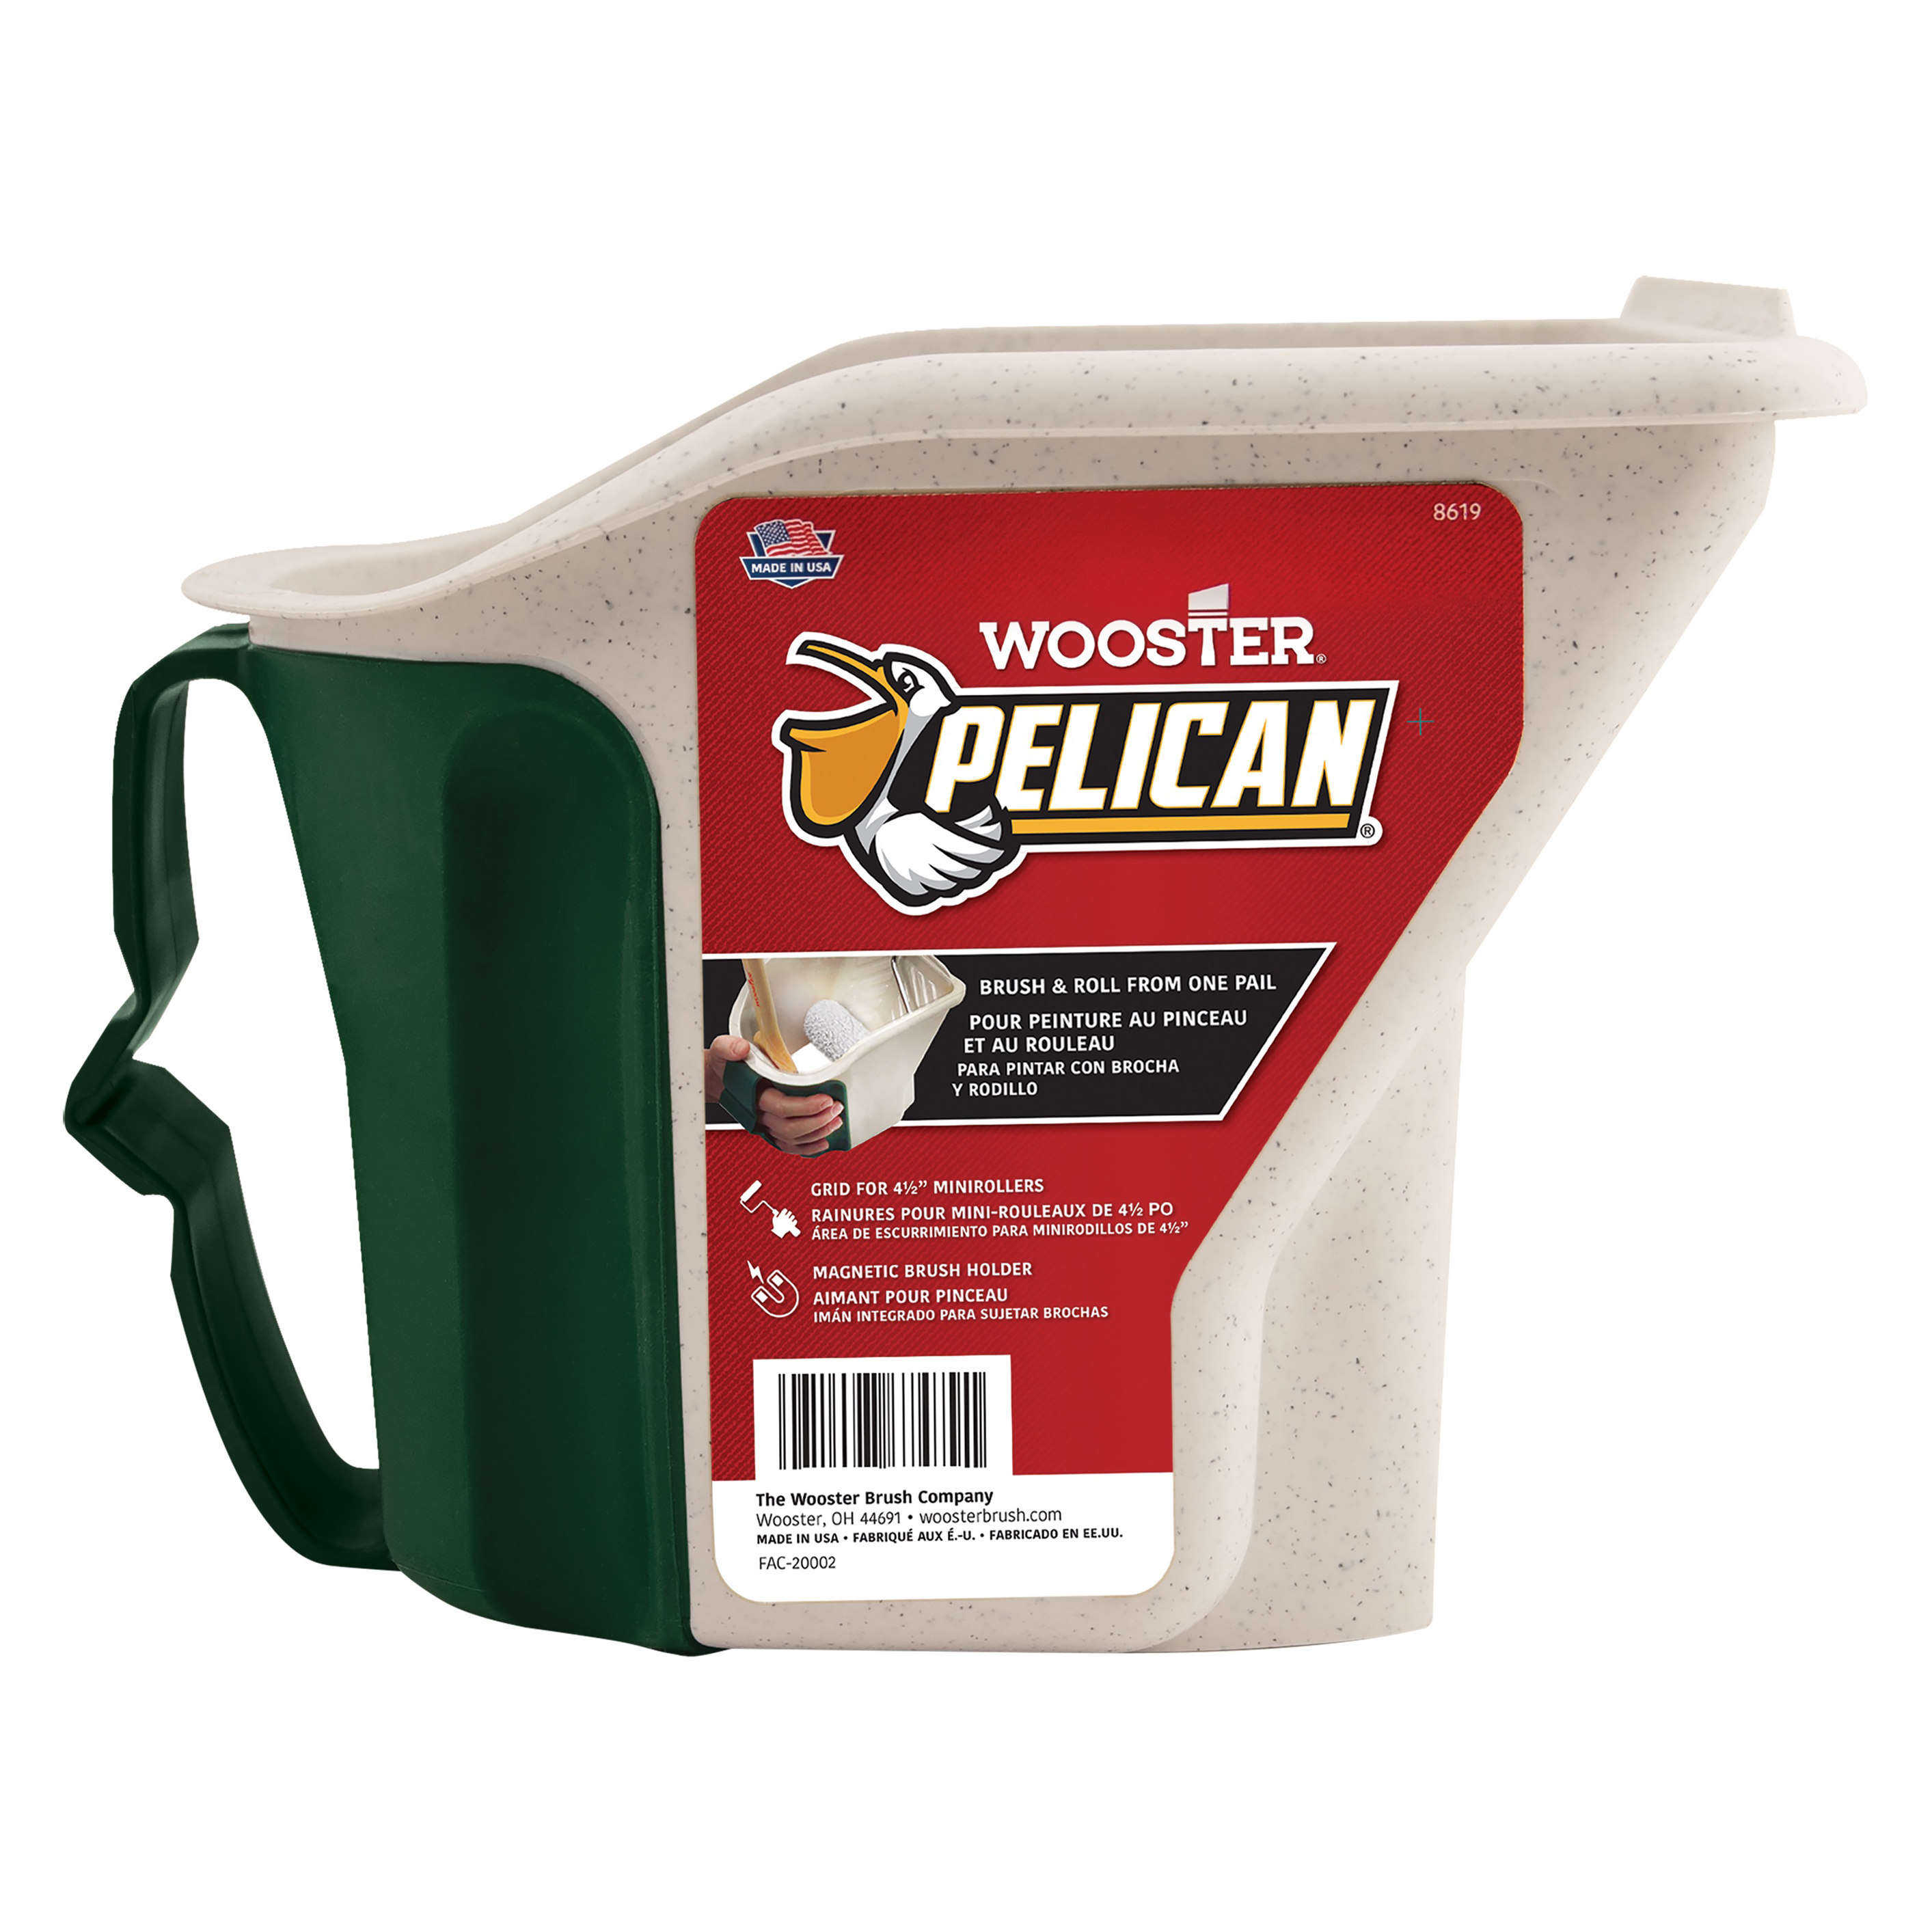 8619 of Wooster 1 Qt Pelican Hand-Held Paint Pail